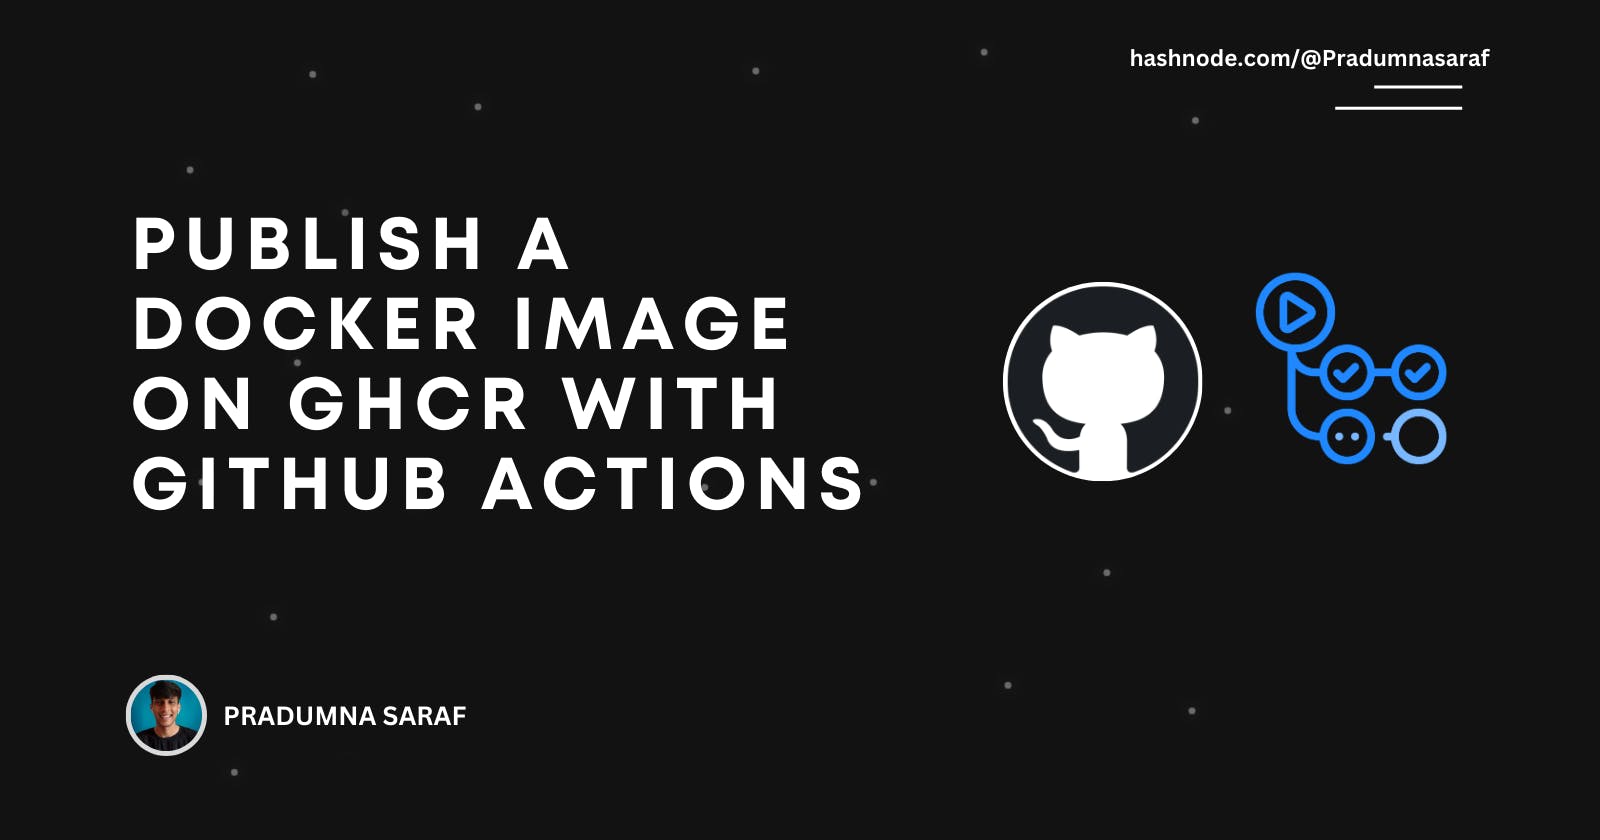 Publish a Docker Image on GHCR with GitHub Actions